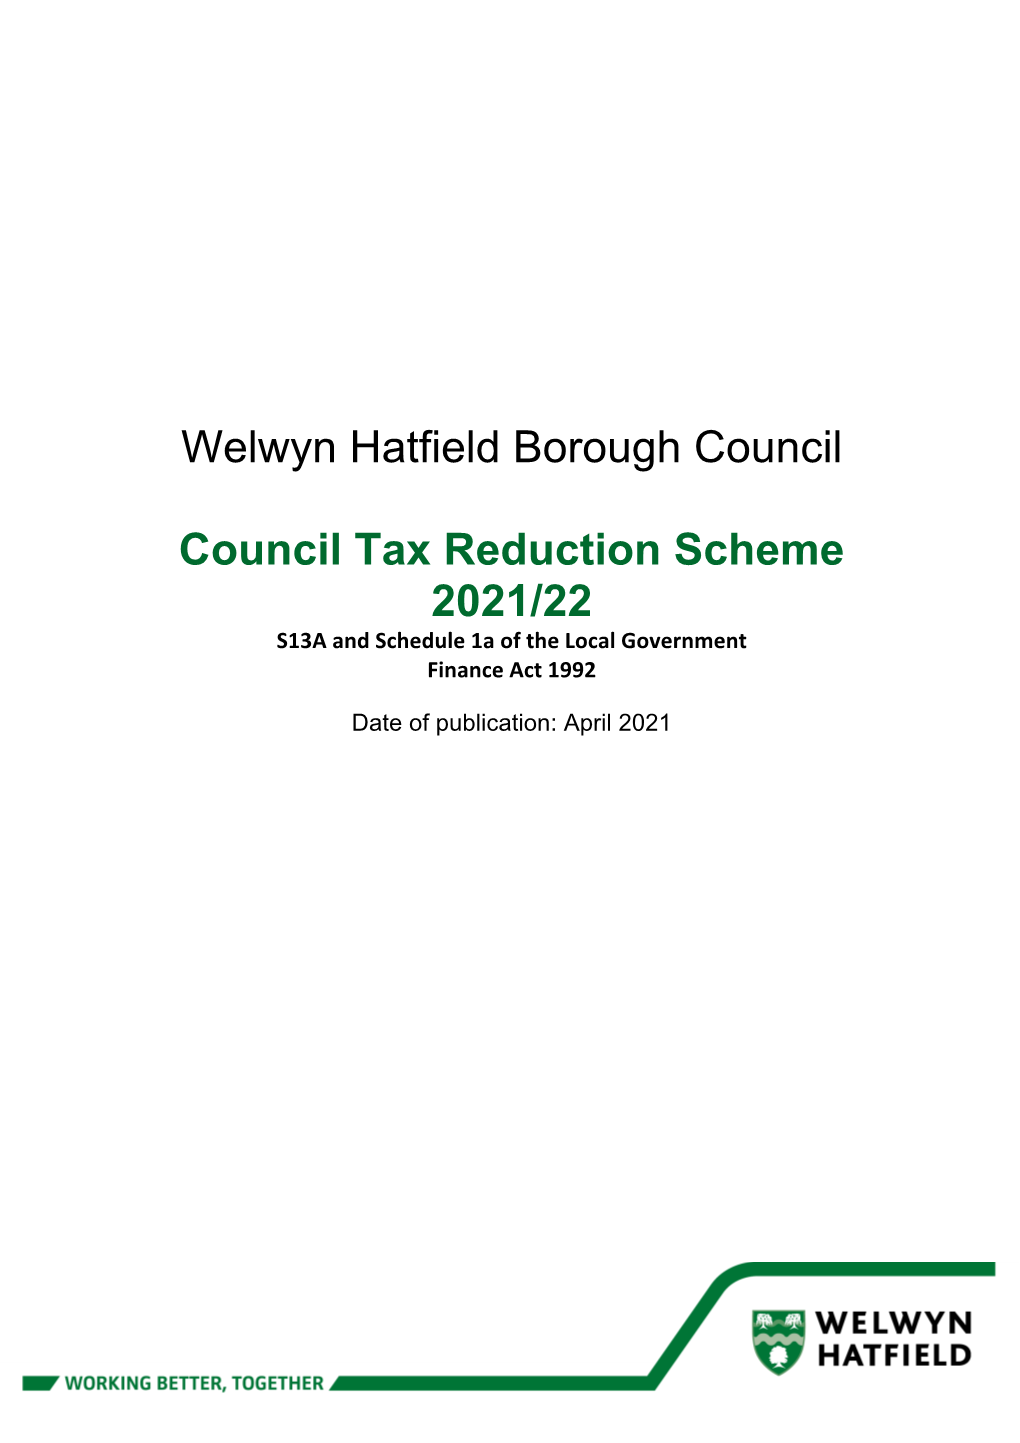 Council Tax Reduction Scheme 2021/22 S13A and Schedule 1A of the Local Government Finance Act 1992